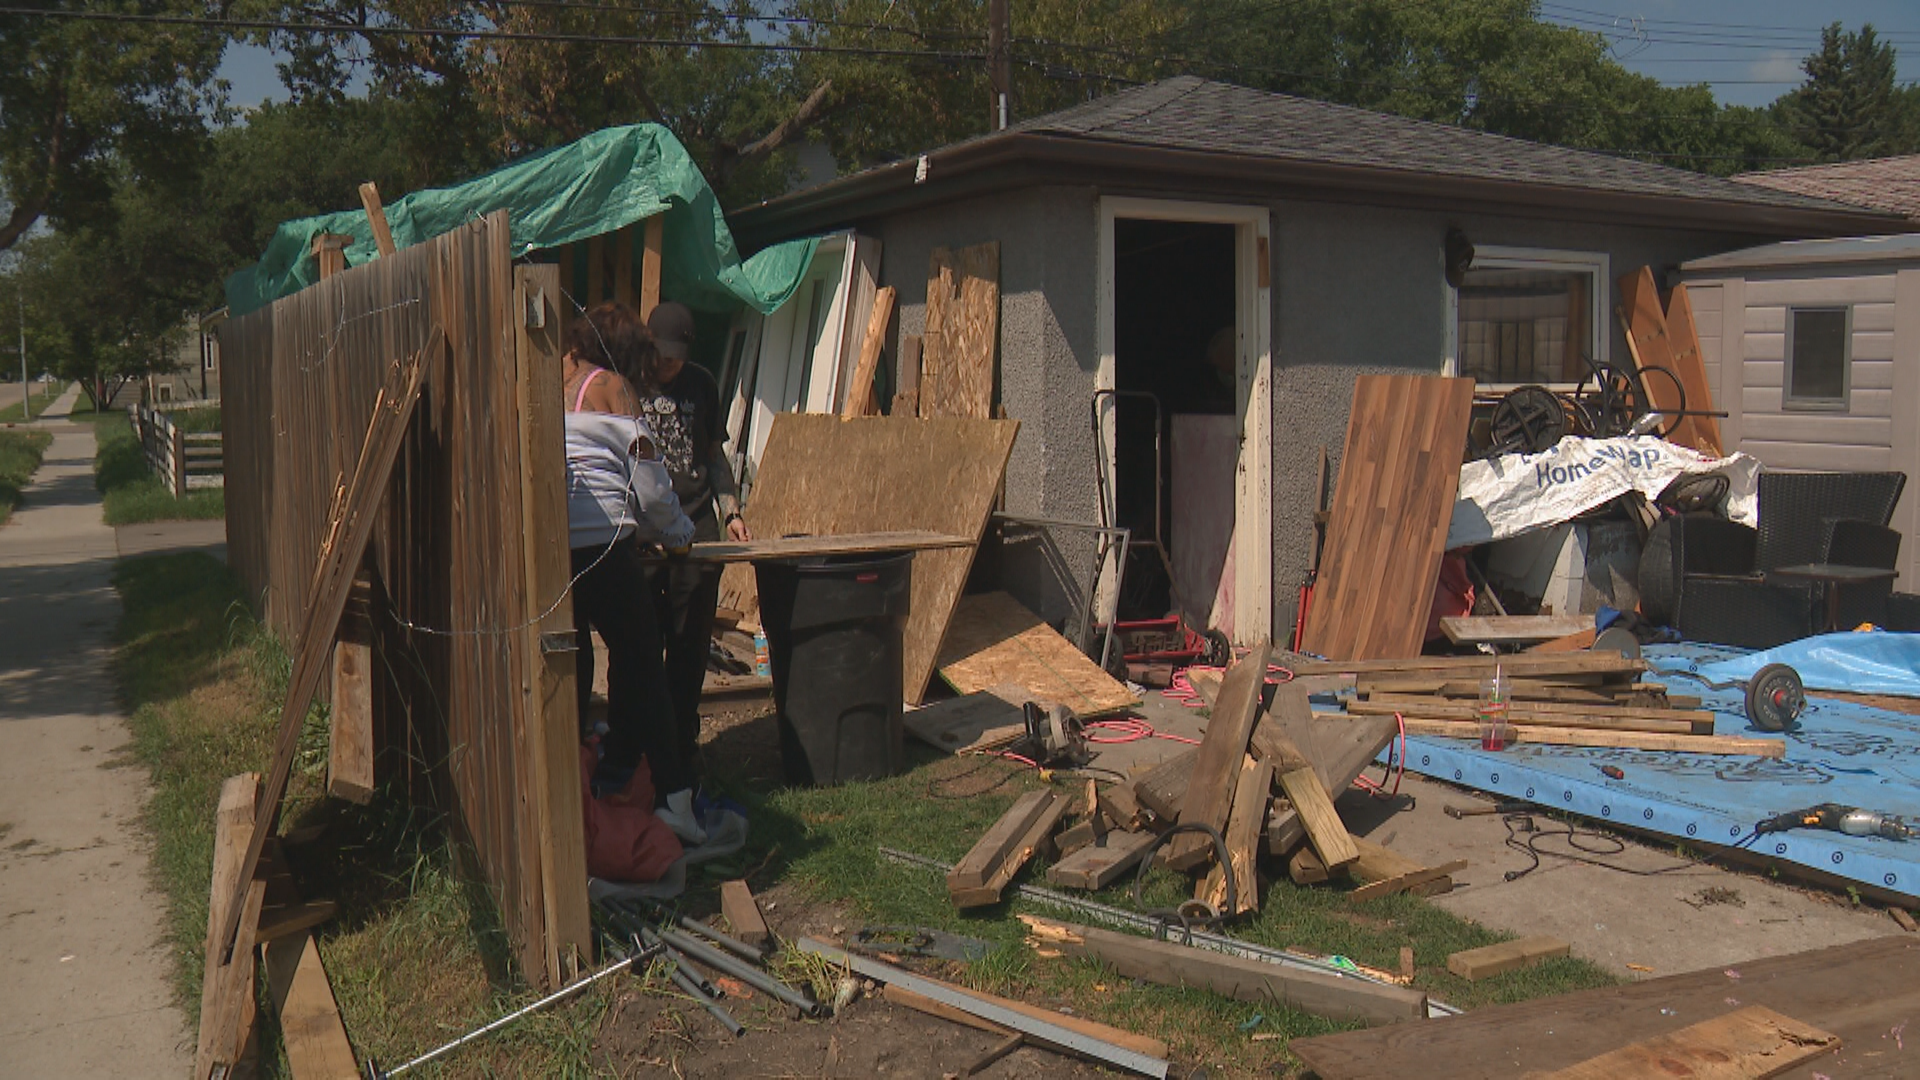 Around 12:10 a.m. on Wednesday, July 5, 2023, Edmonton police were called to a home in the area of 122 Avenue and 92 Street that had been hit and significantly damaged by a silver sedan.